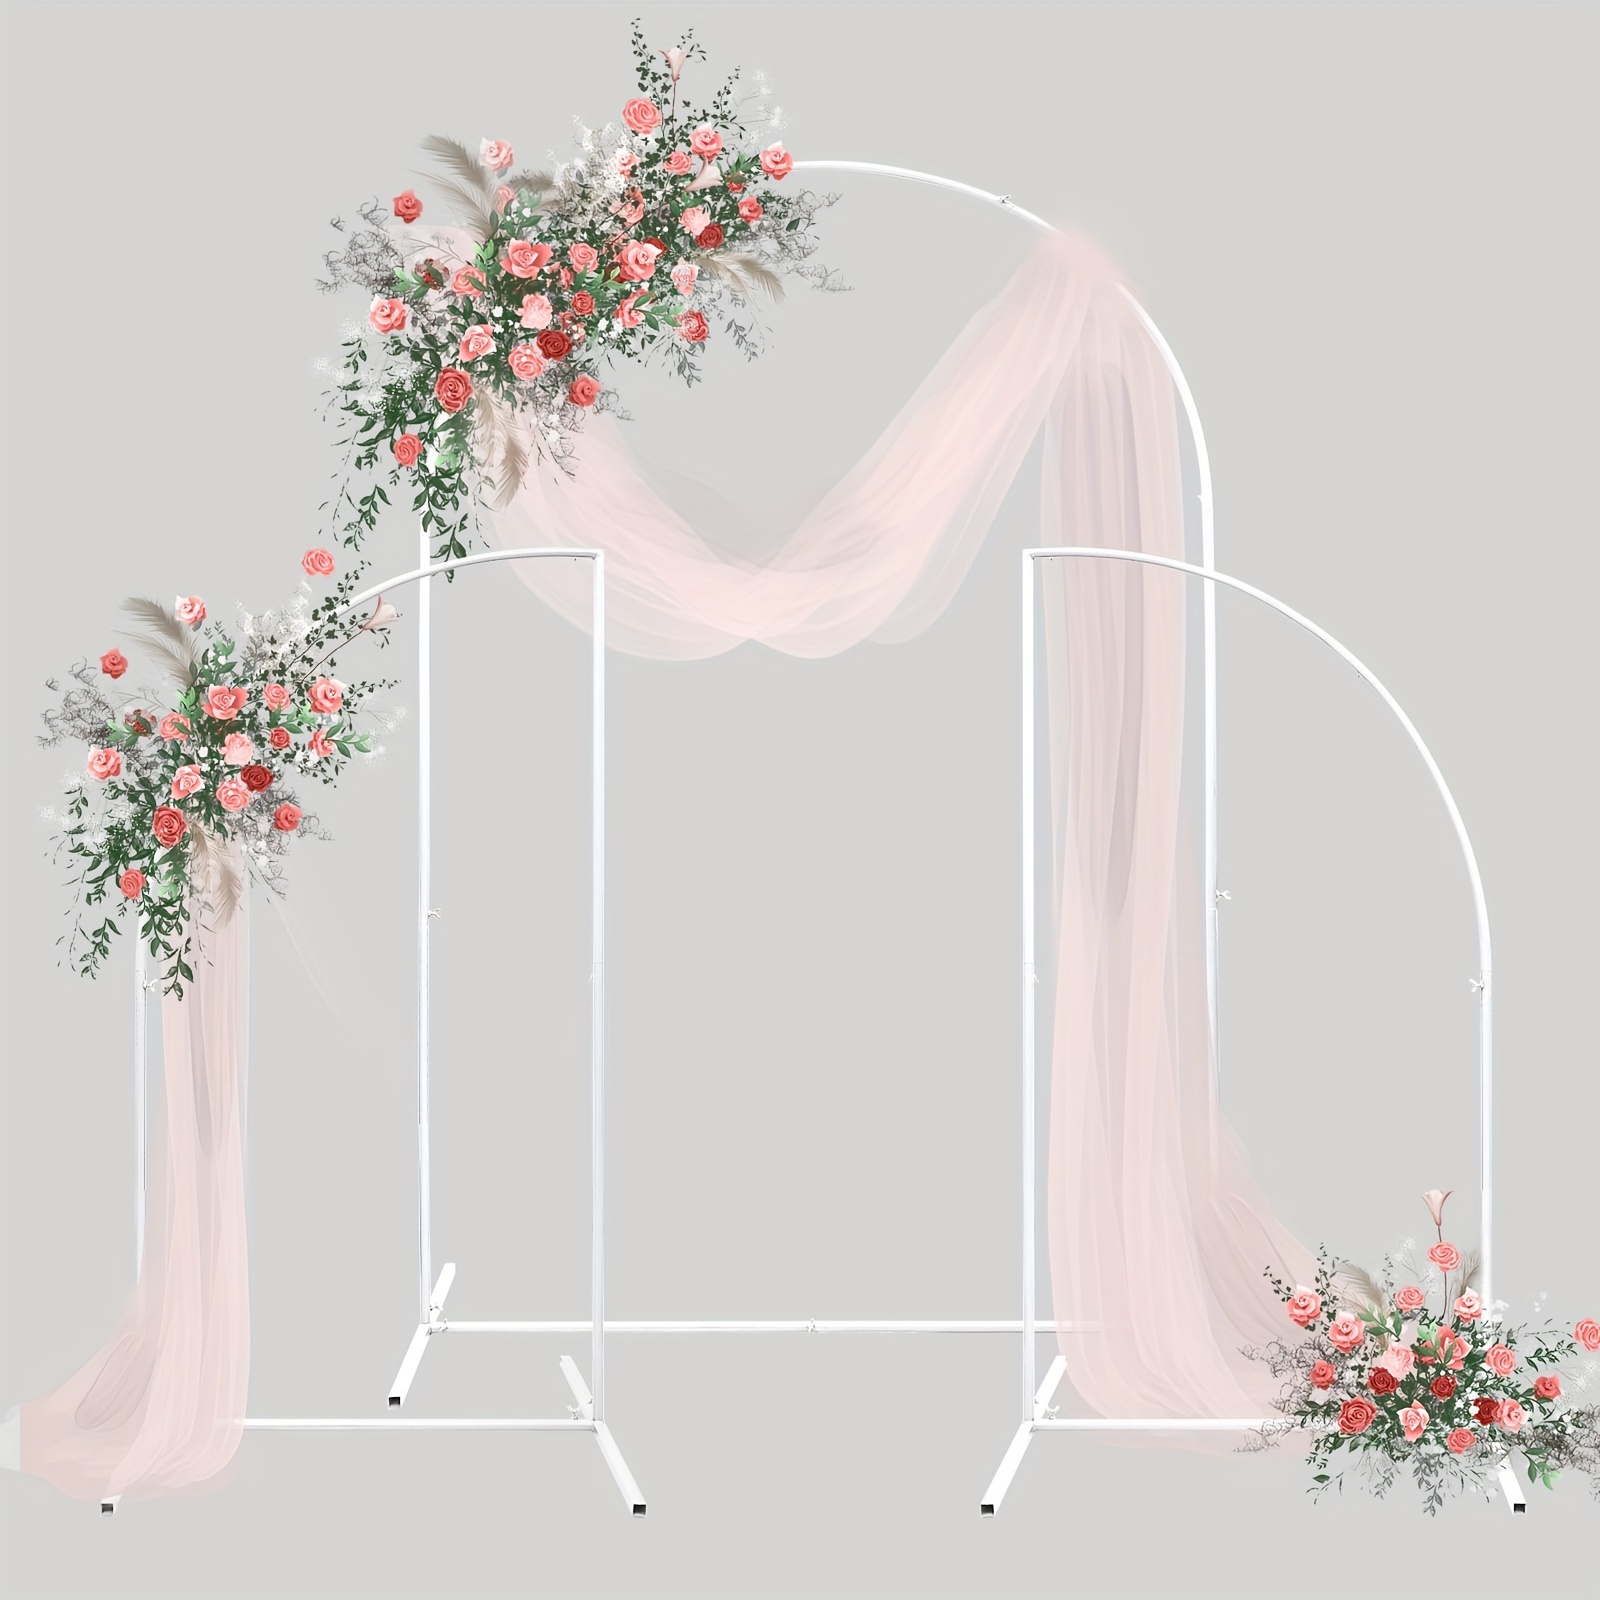 

Metal Arch Backdrop Stand Wedding Arch Stand Square Wedding Door Arch Frame For Ceremony Anniversary Birthday Party Celebration